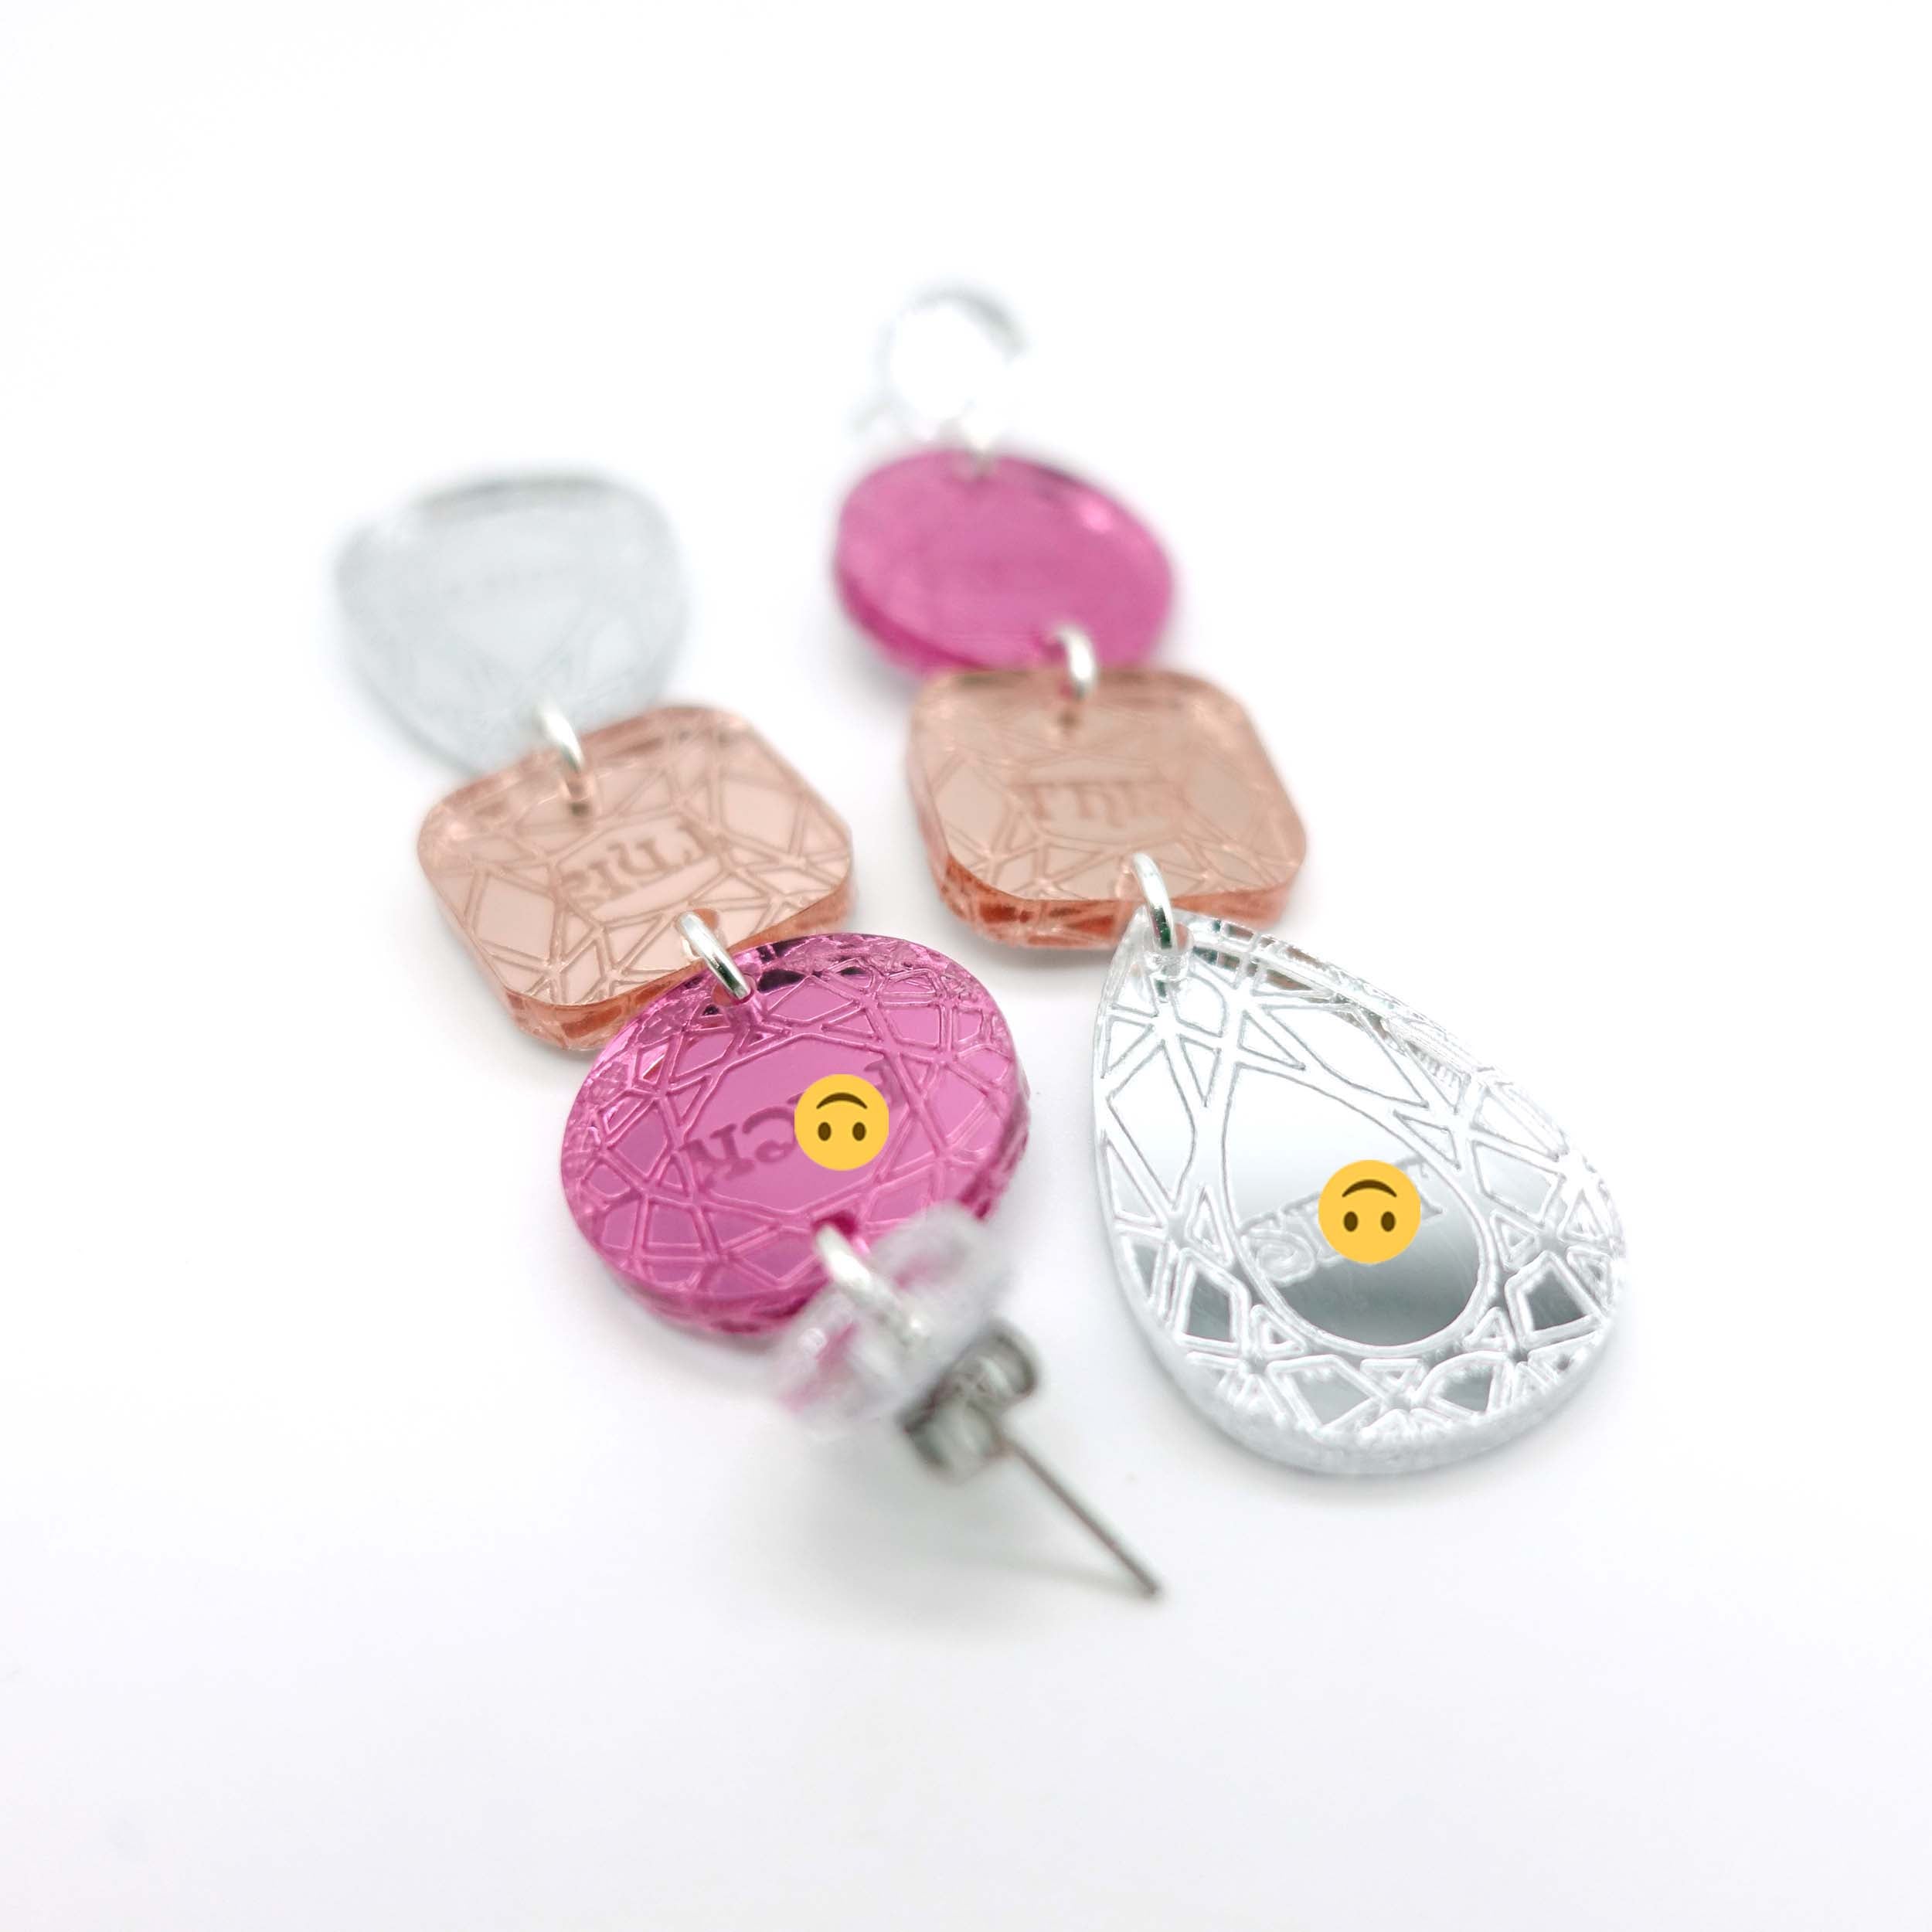 Sweary austerity jewel earrings in pink, rose gold and silver shown  on a white background. 